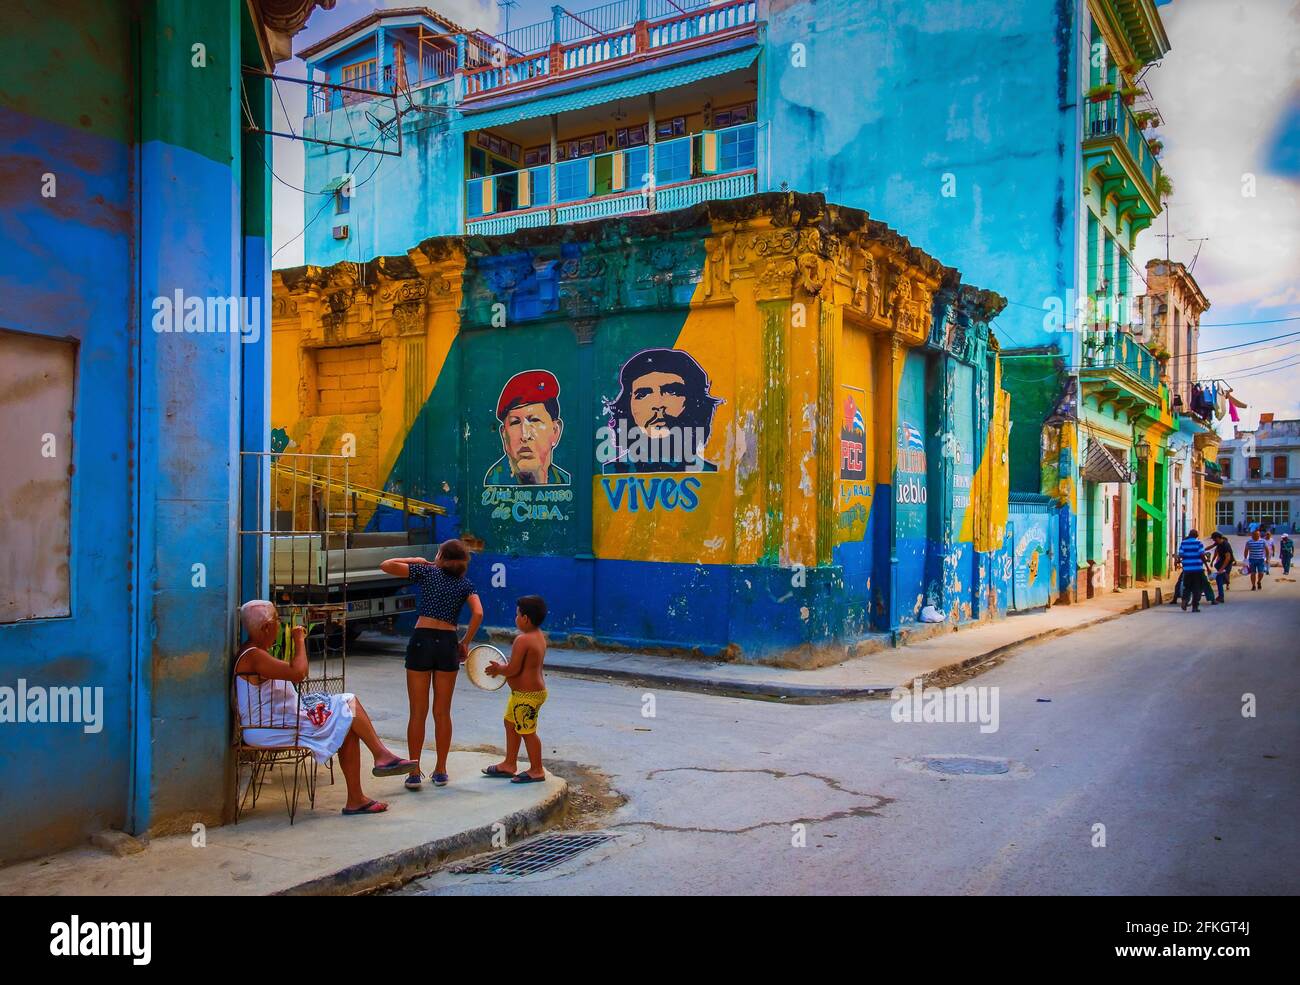 Havana, Cuba, July 2019, urban scene by a mural of the portrait of Hugo Chavez and Che Guevara in the oldest part of the city Stock Photo